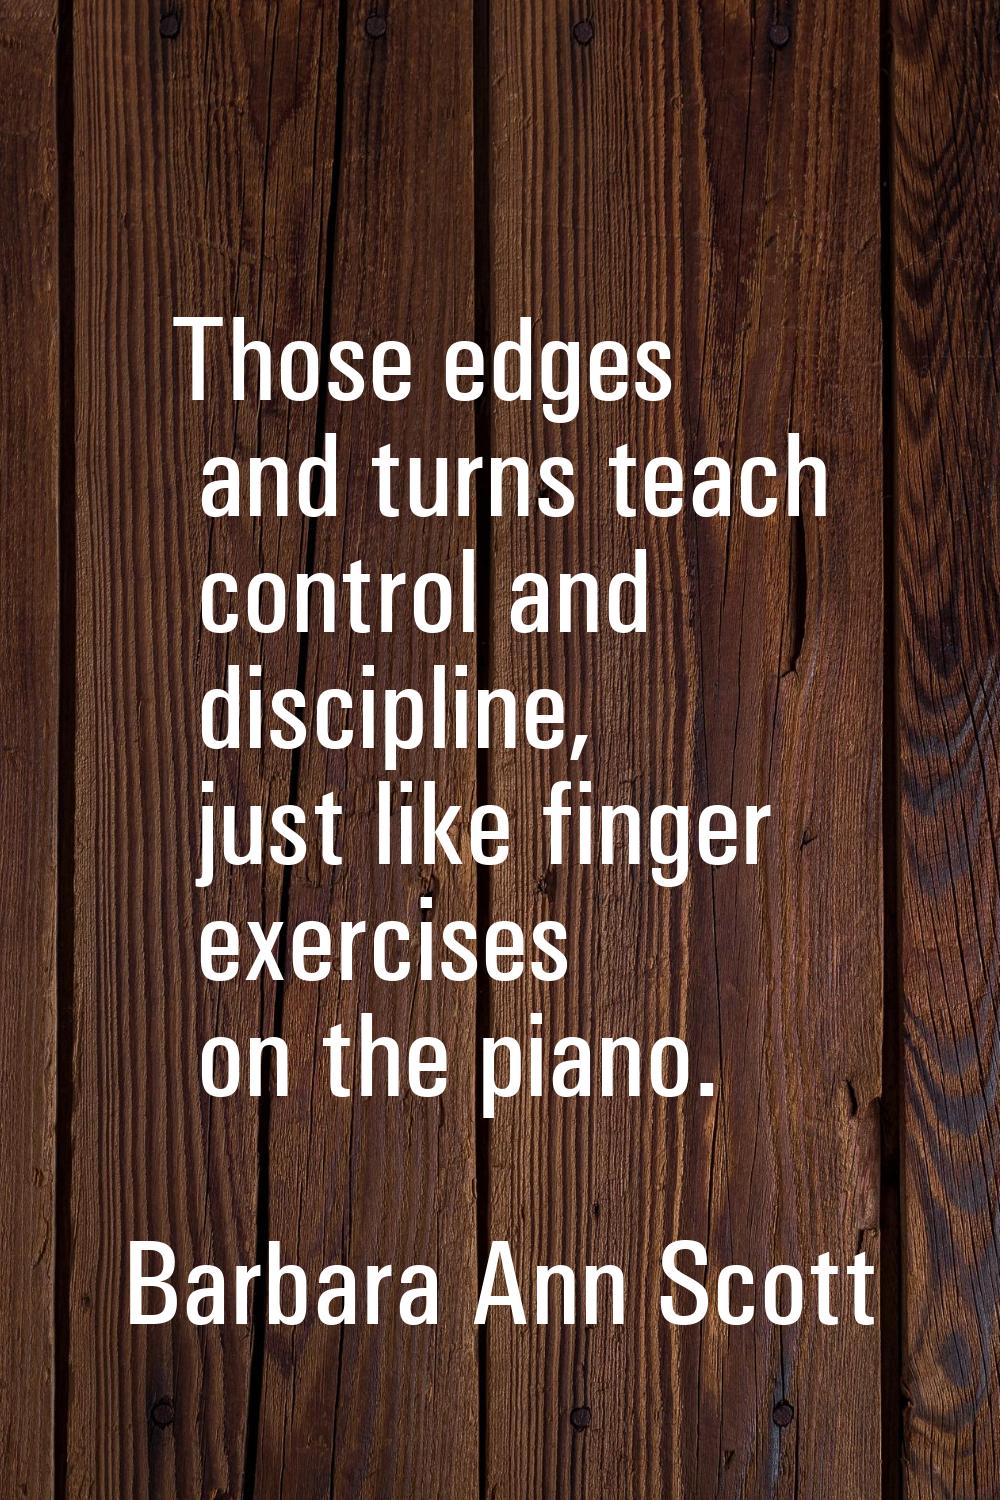 Those edges and turns teach control and discipline, just like finger exercises on the piano.